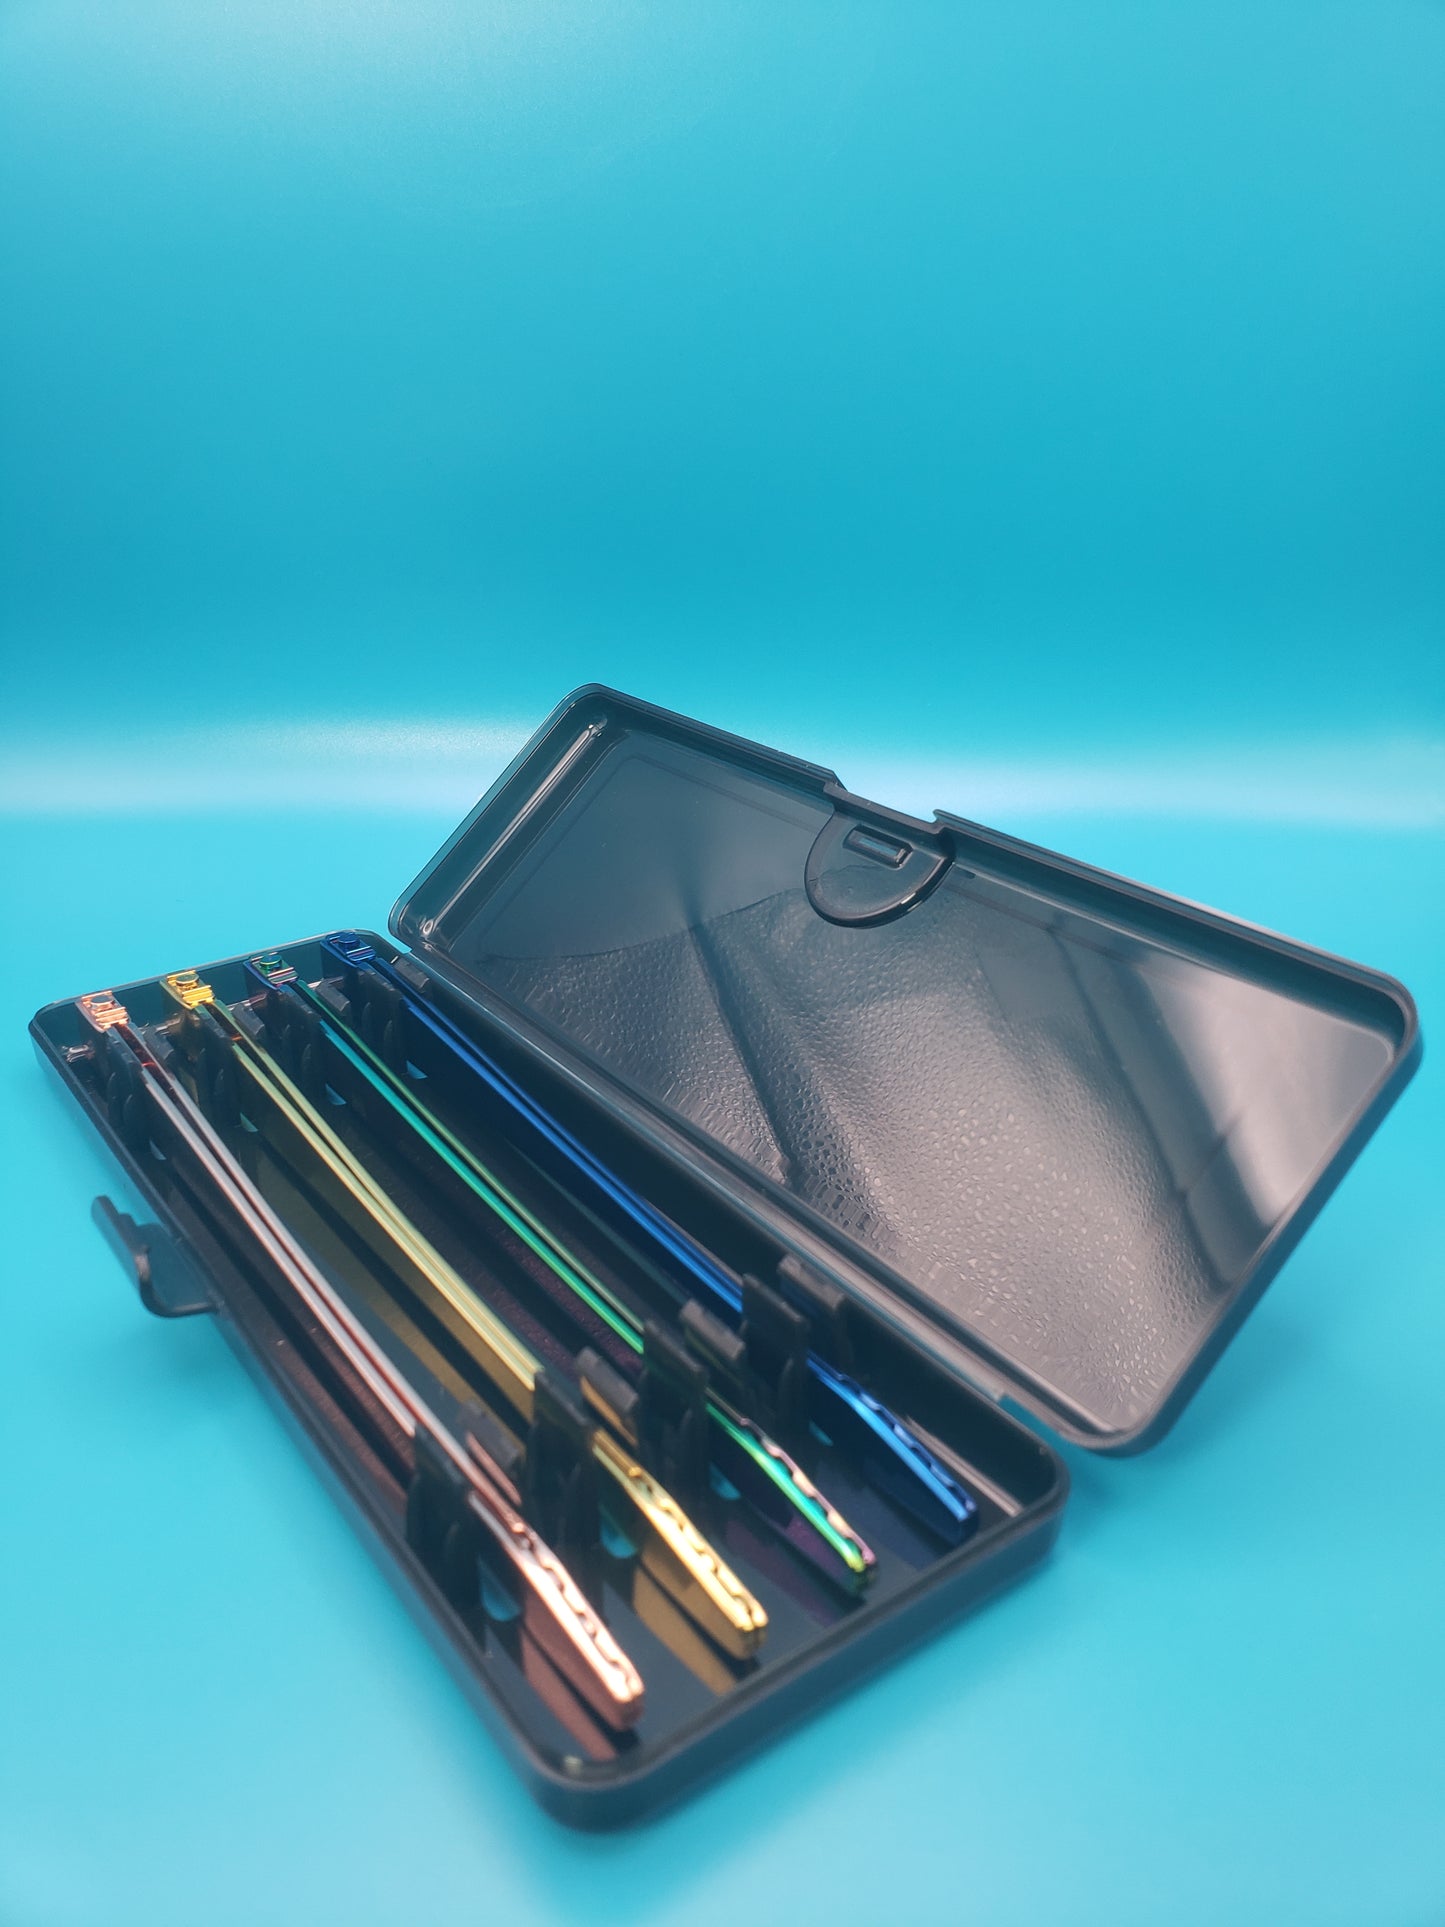 Fourth Option Family Carry Case